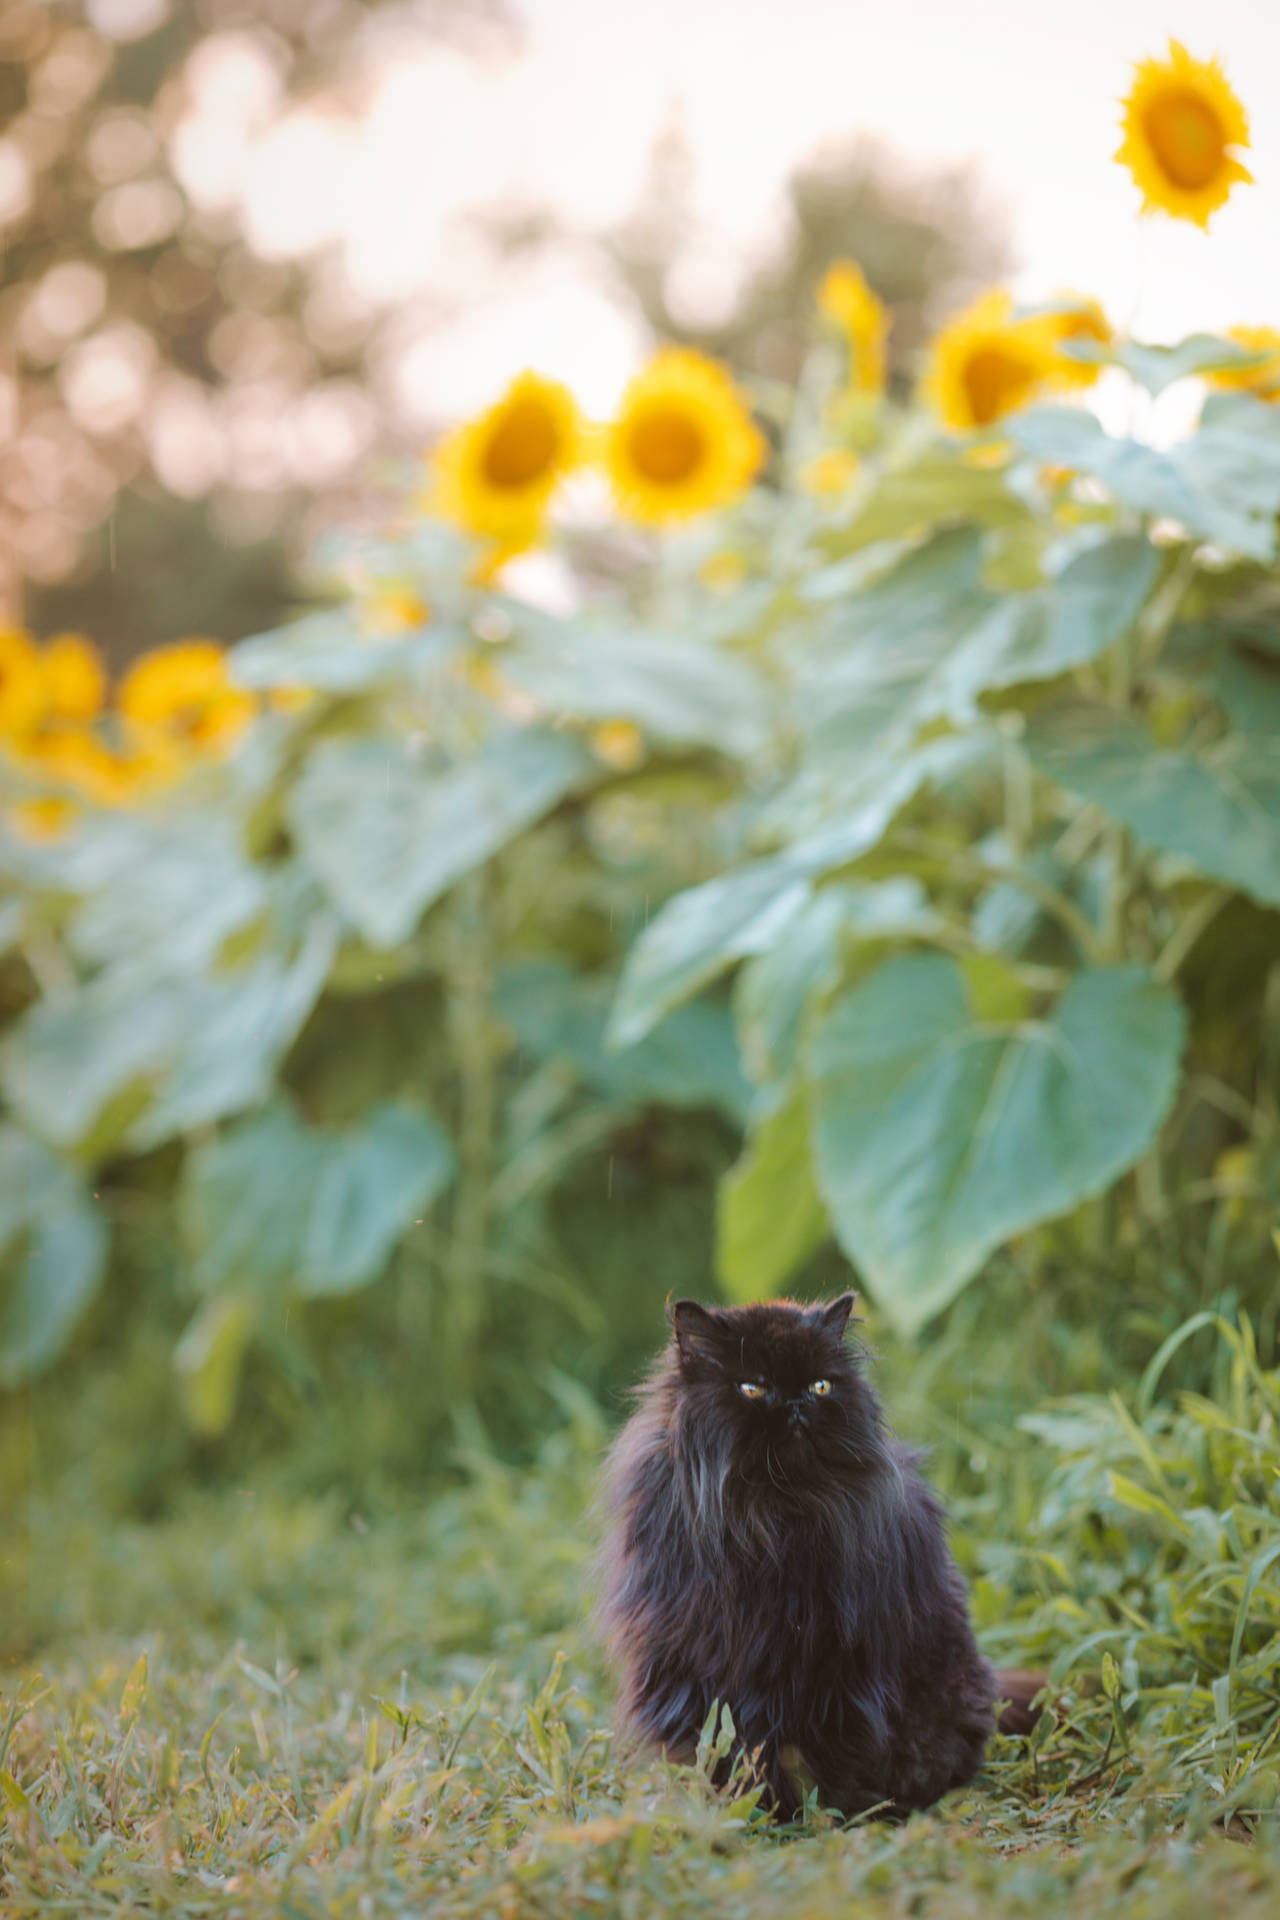 Aesthetic Cat With Sunflowers Wallpaper